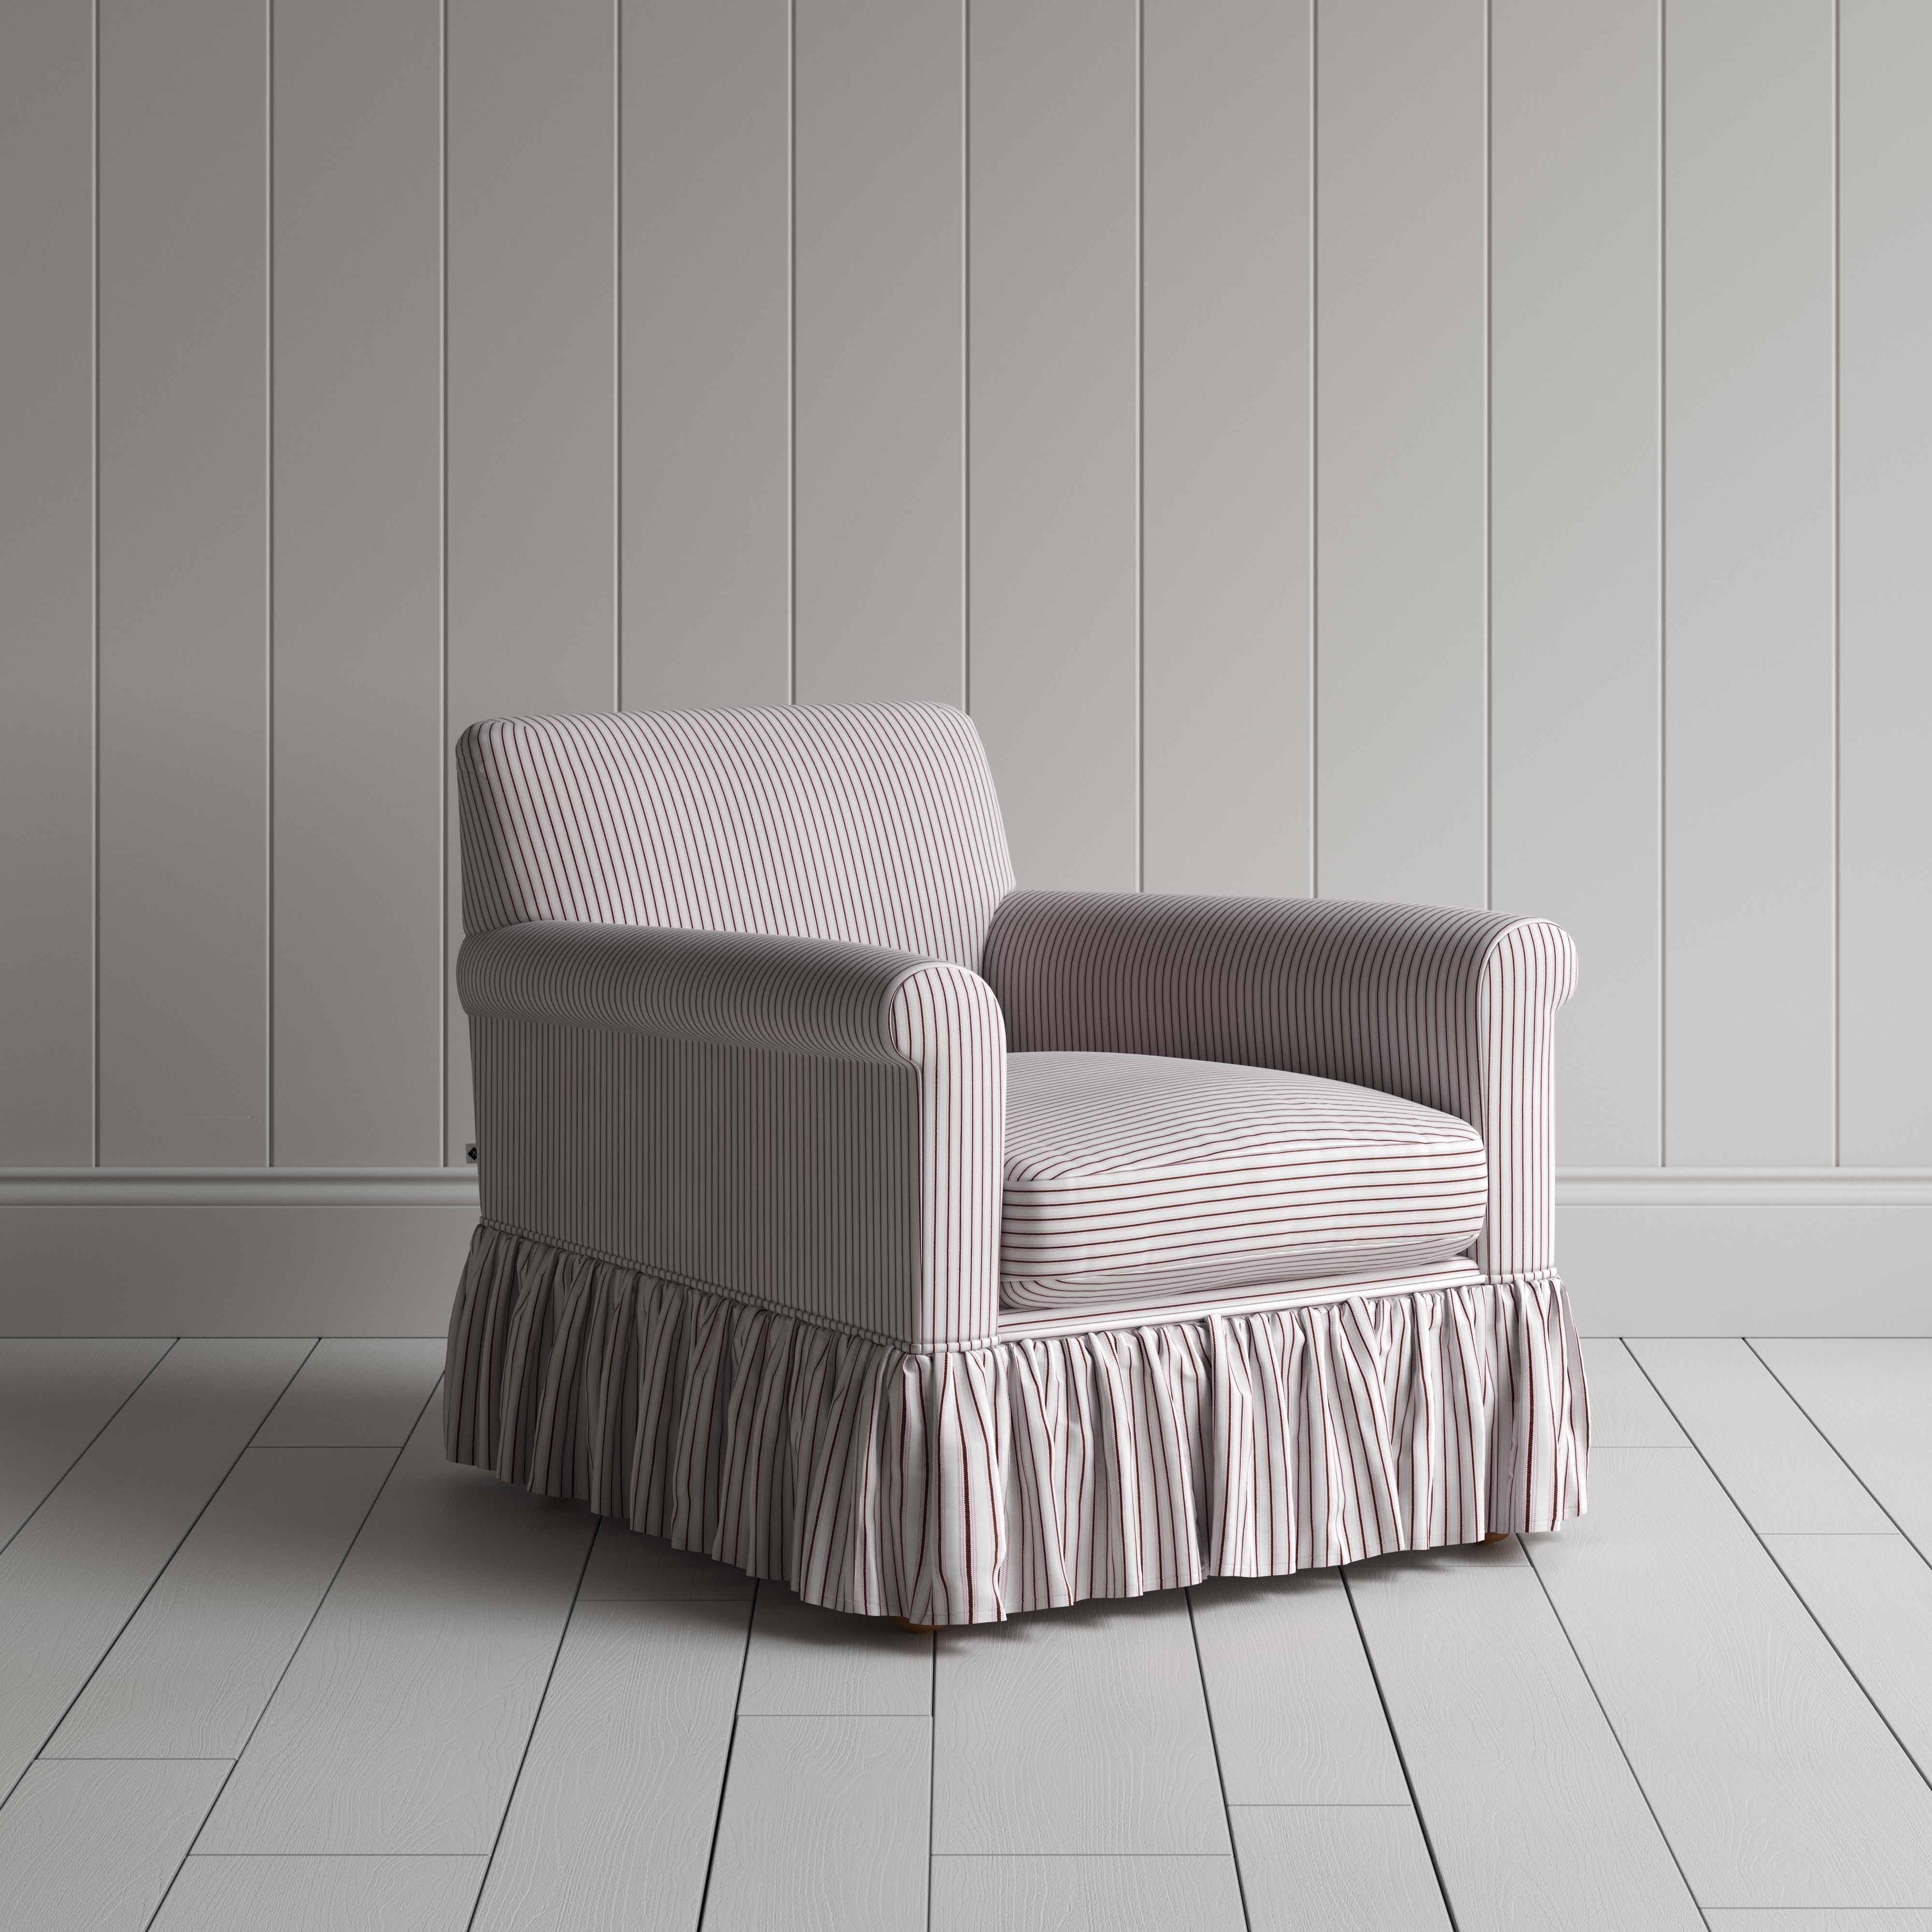  Curtain Call Armchair in Ticking Cotton, Berry 